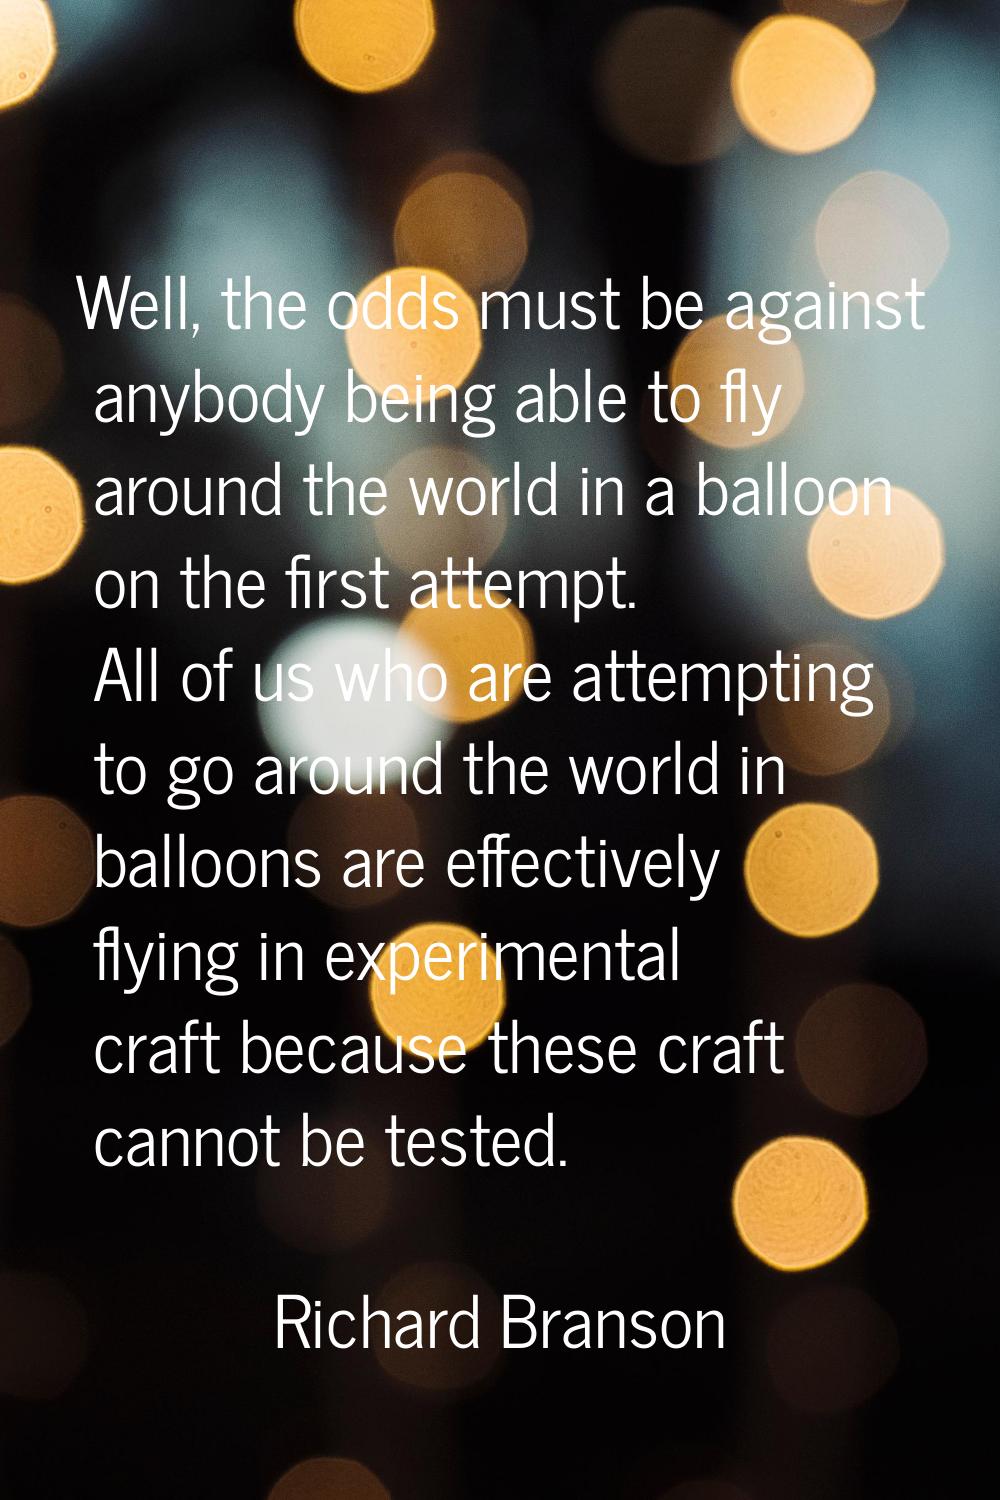 Well, the odds must be against anybody being able to fly around the world in a balloon on the first